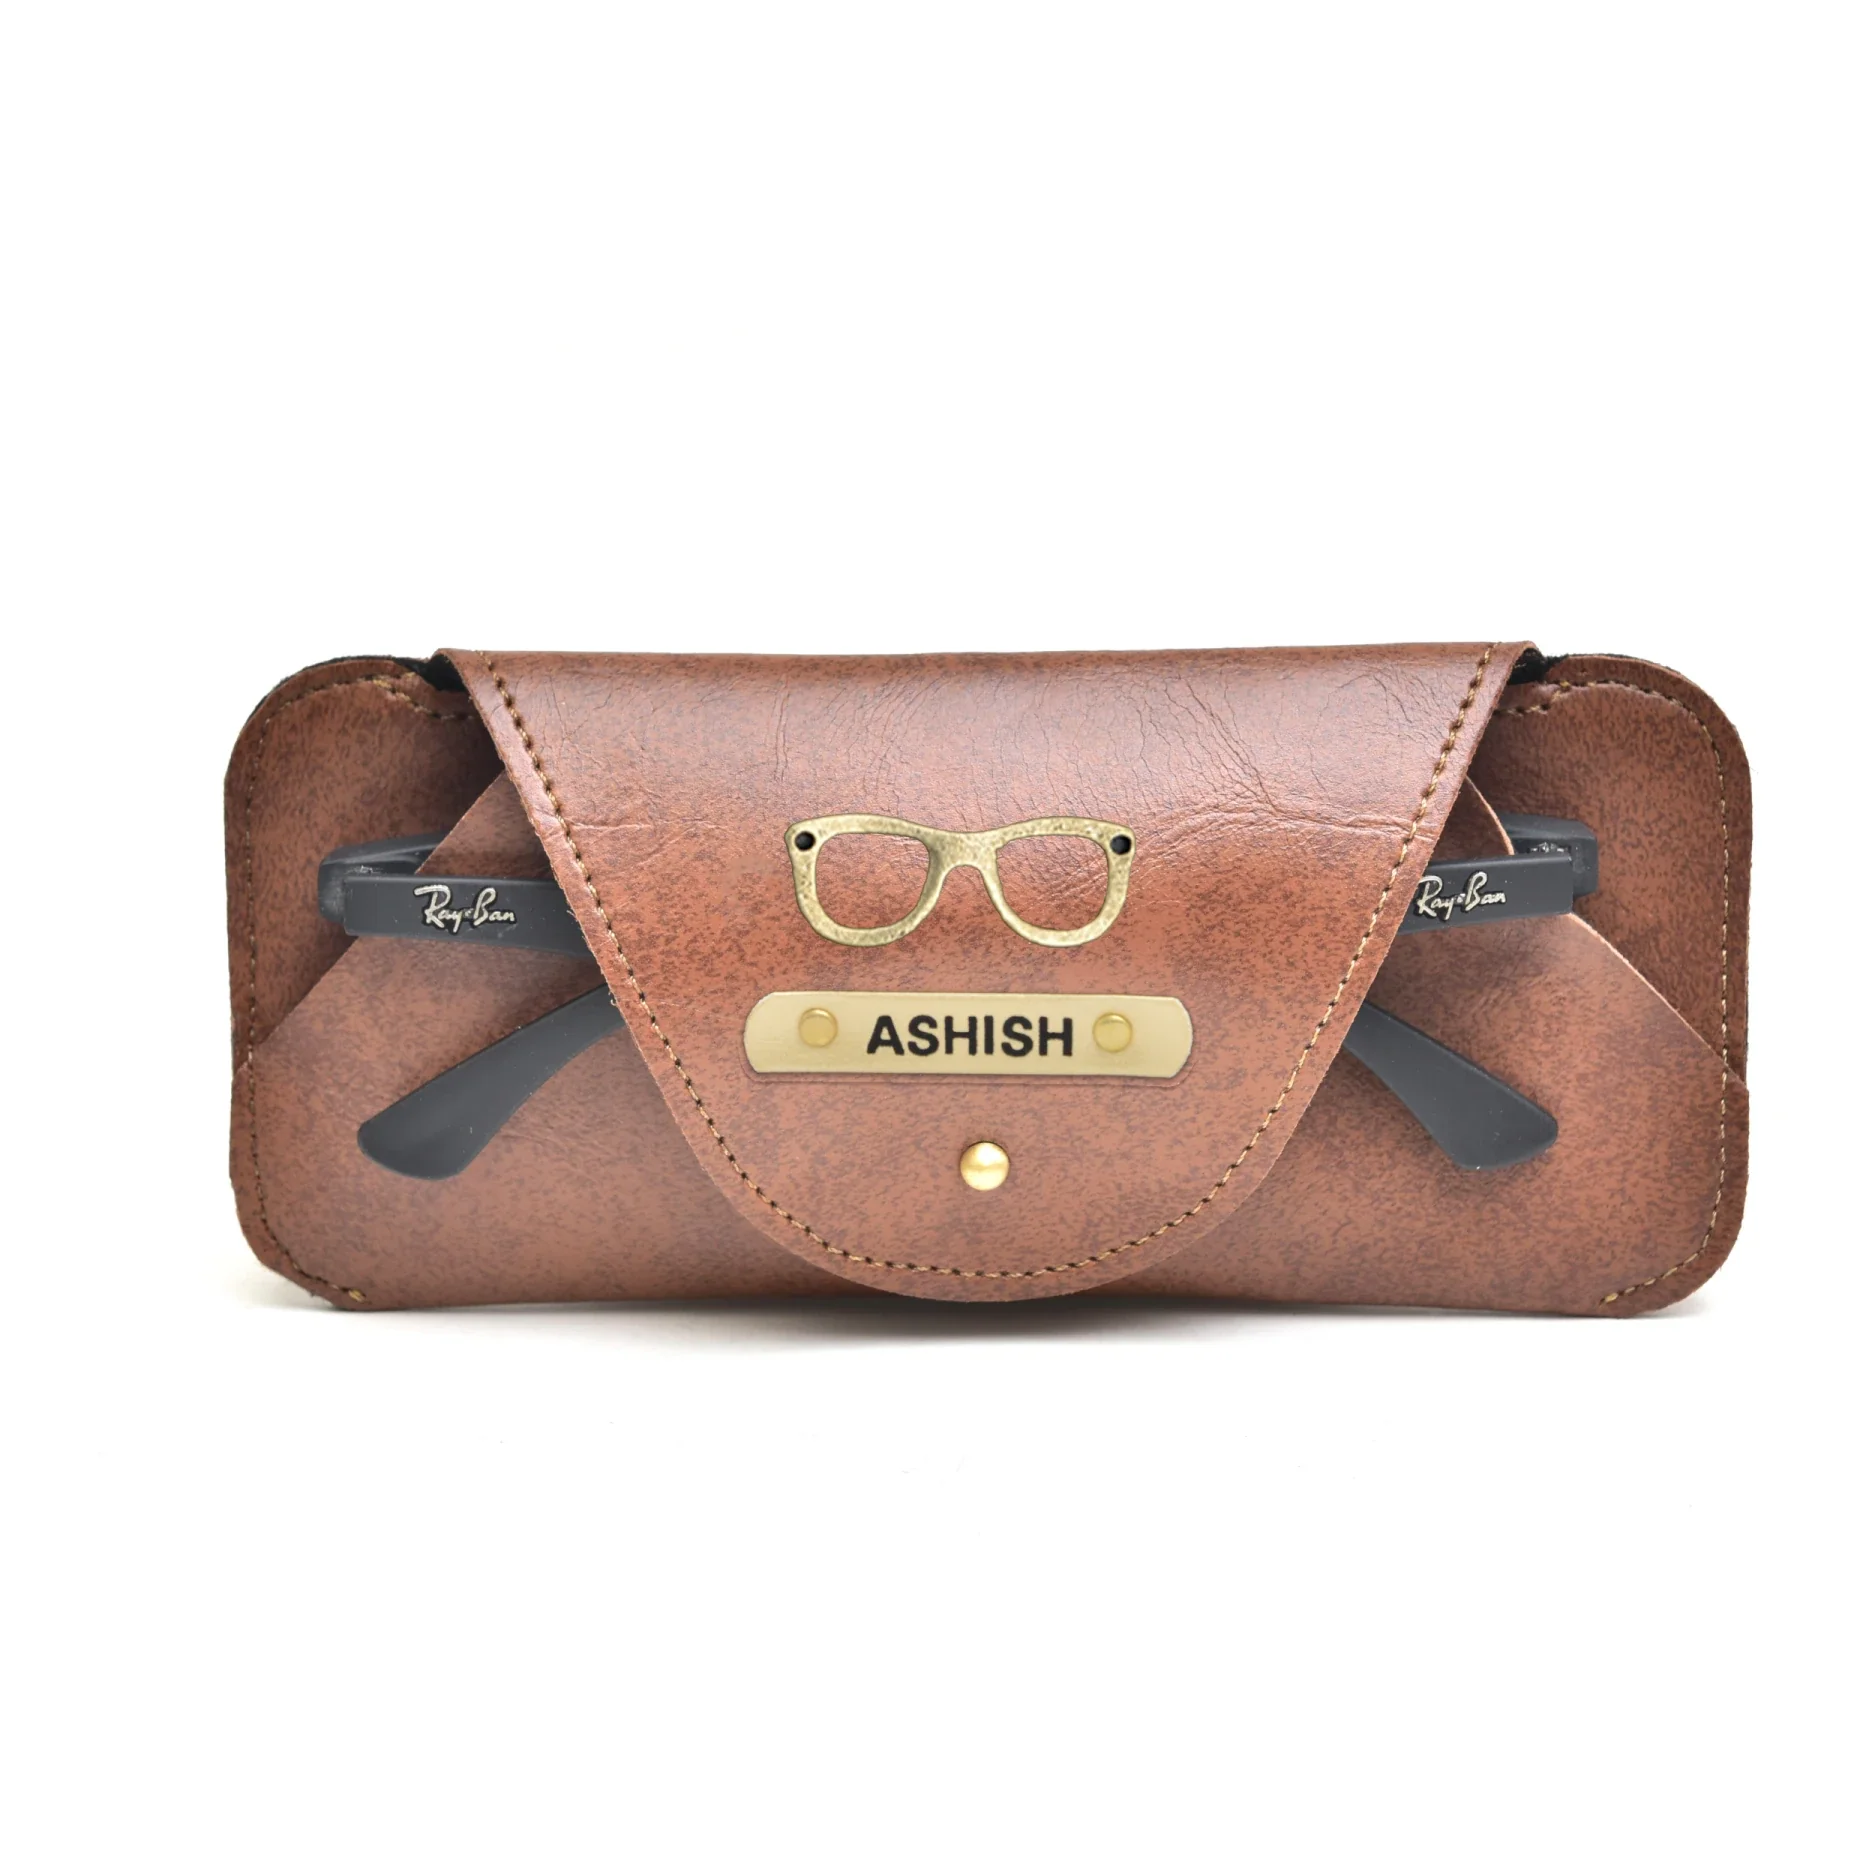 Personalize your eyewear storage with this stylish and practical case.